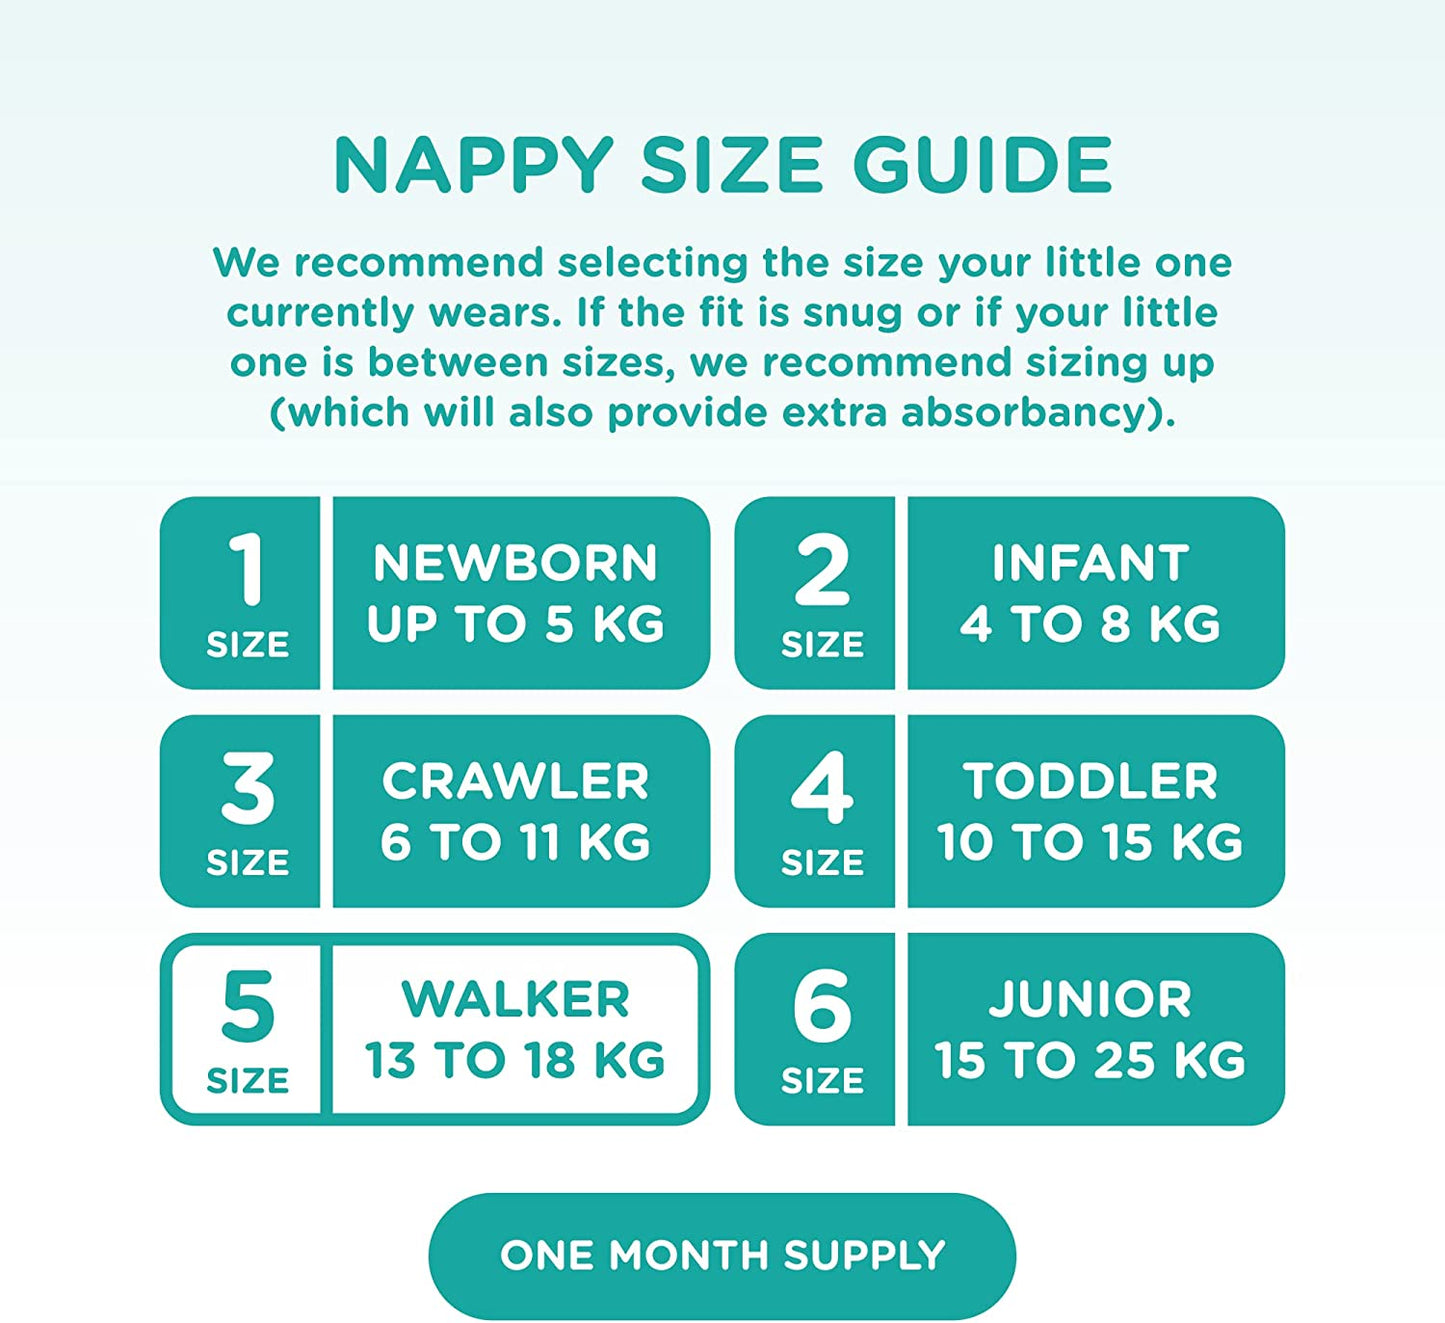 Cuddly Bubs, Size 5 Walker nappies (up to 13-18kg), 132 nappies